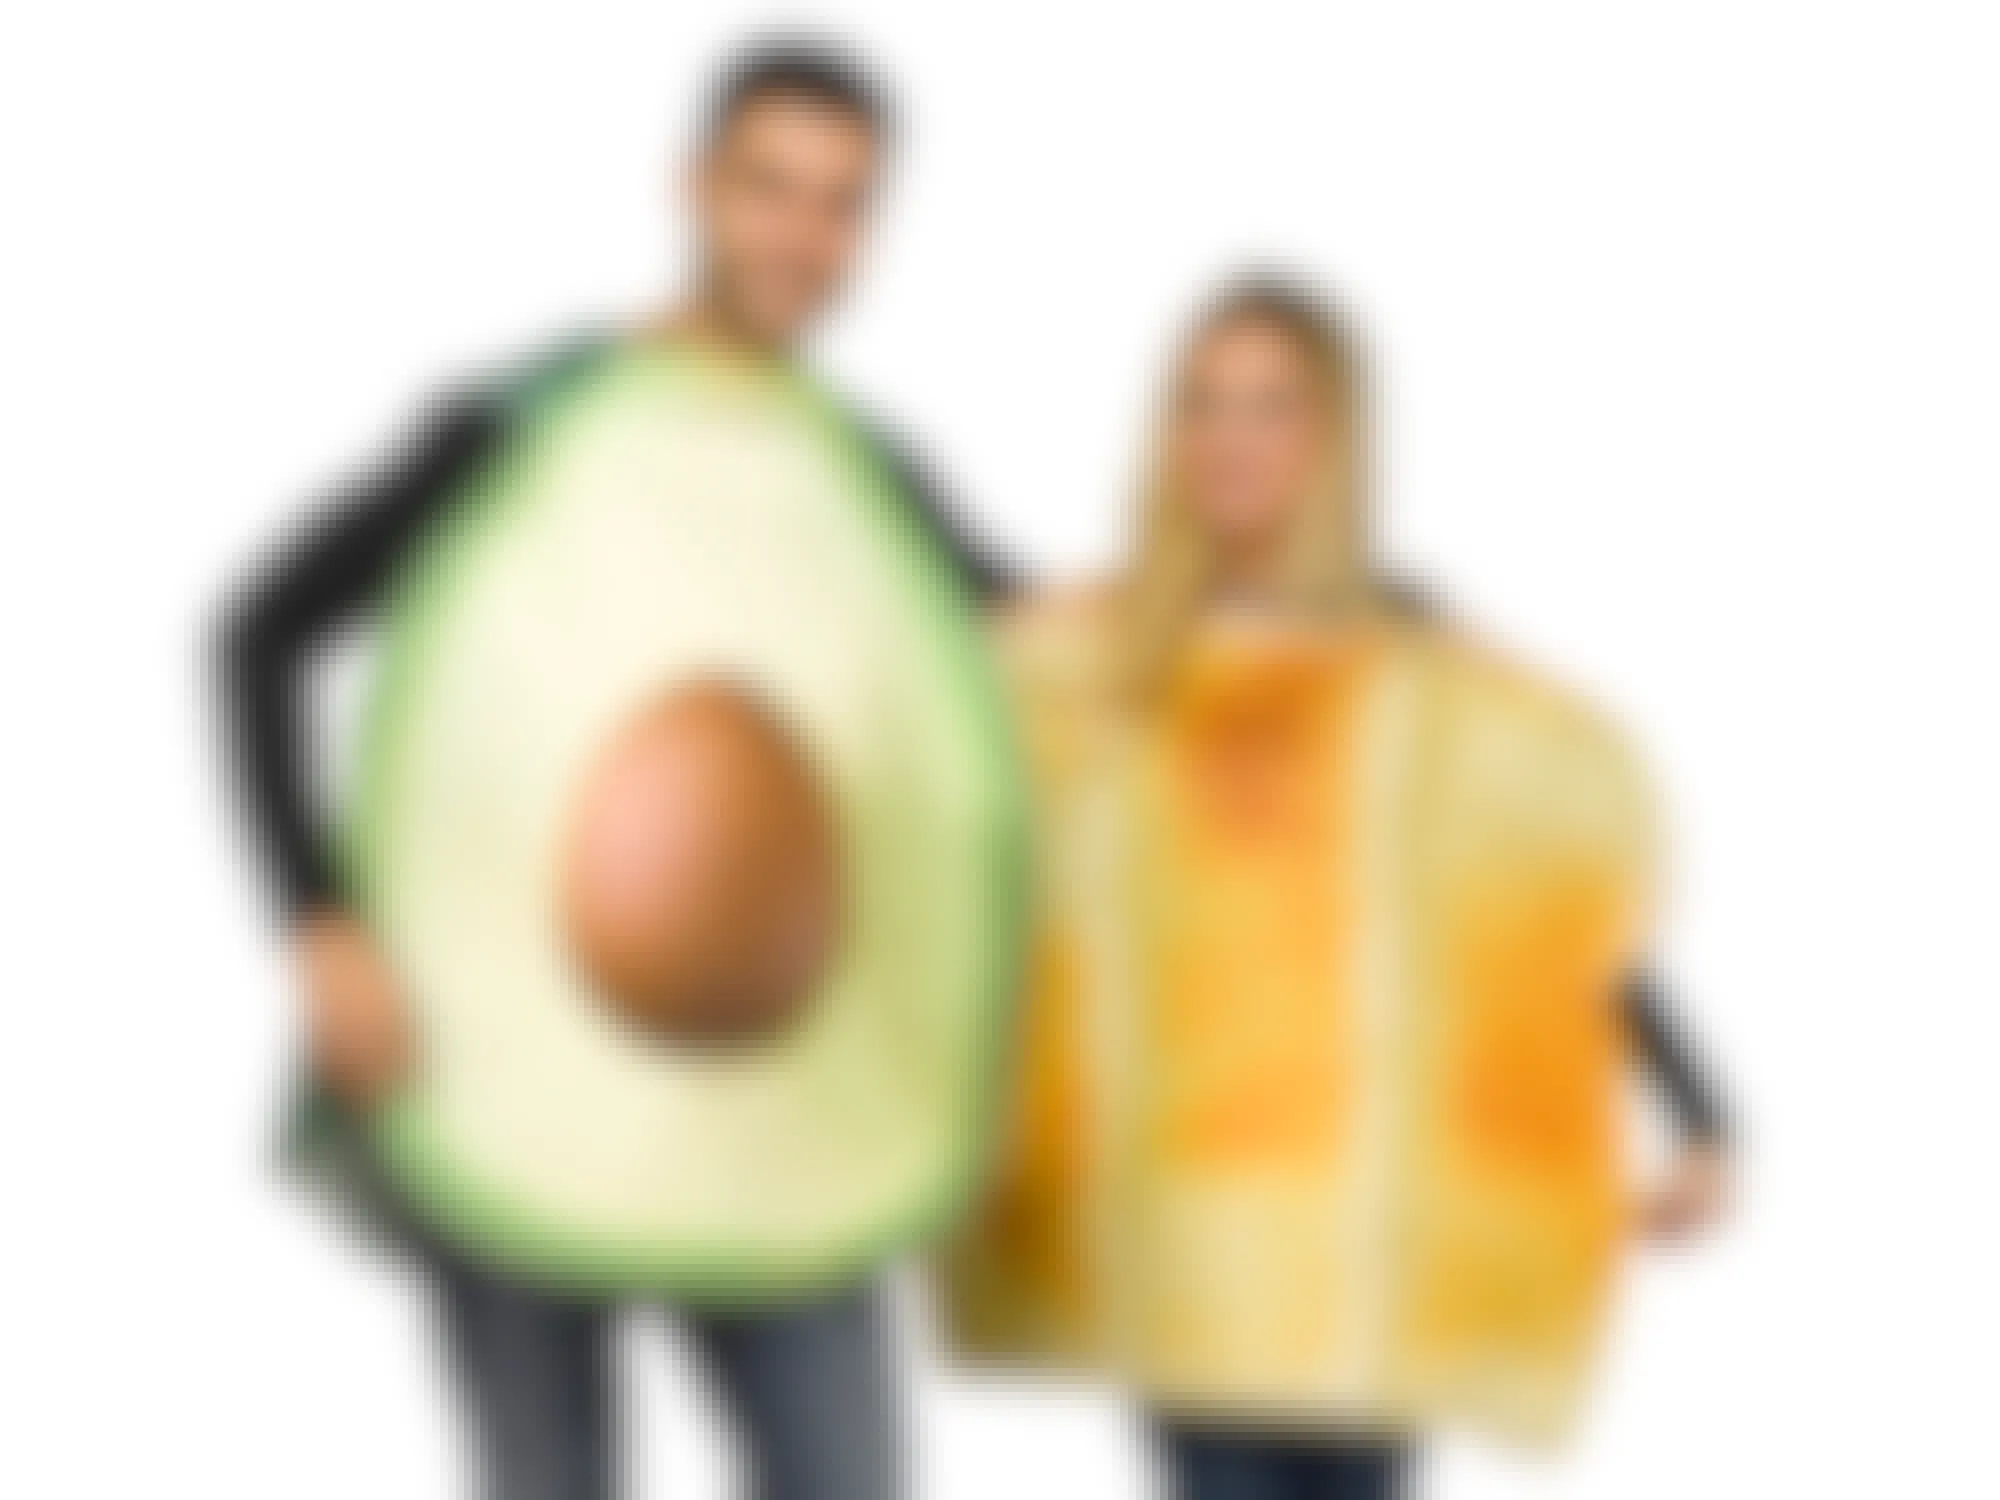 avocado and toast couples halloween costumes